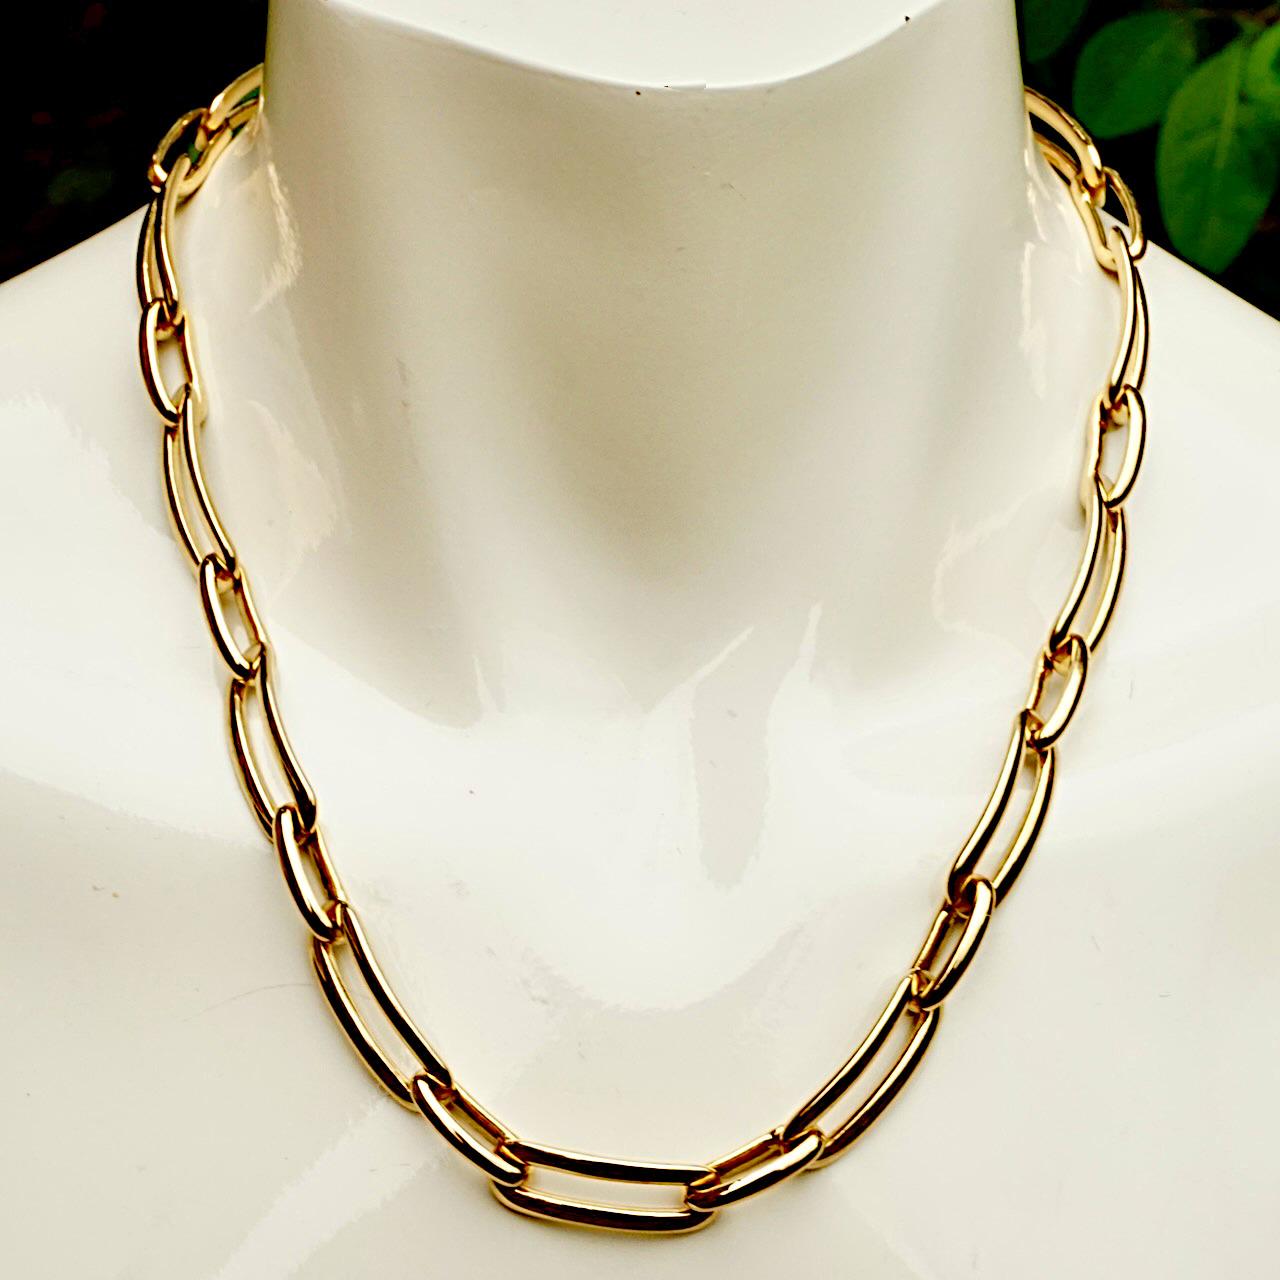 Monet 22ct triple gold plated chain necklace with oblong links. Measuring length 48.5 cm / 19 inches by width 1 cm / .39 inch. The chain has an adjustable double clasp which reduces the length to 40.8 cm / 16 inches. The necklace is in very good